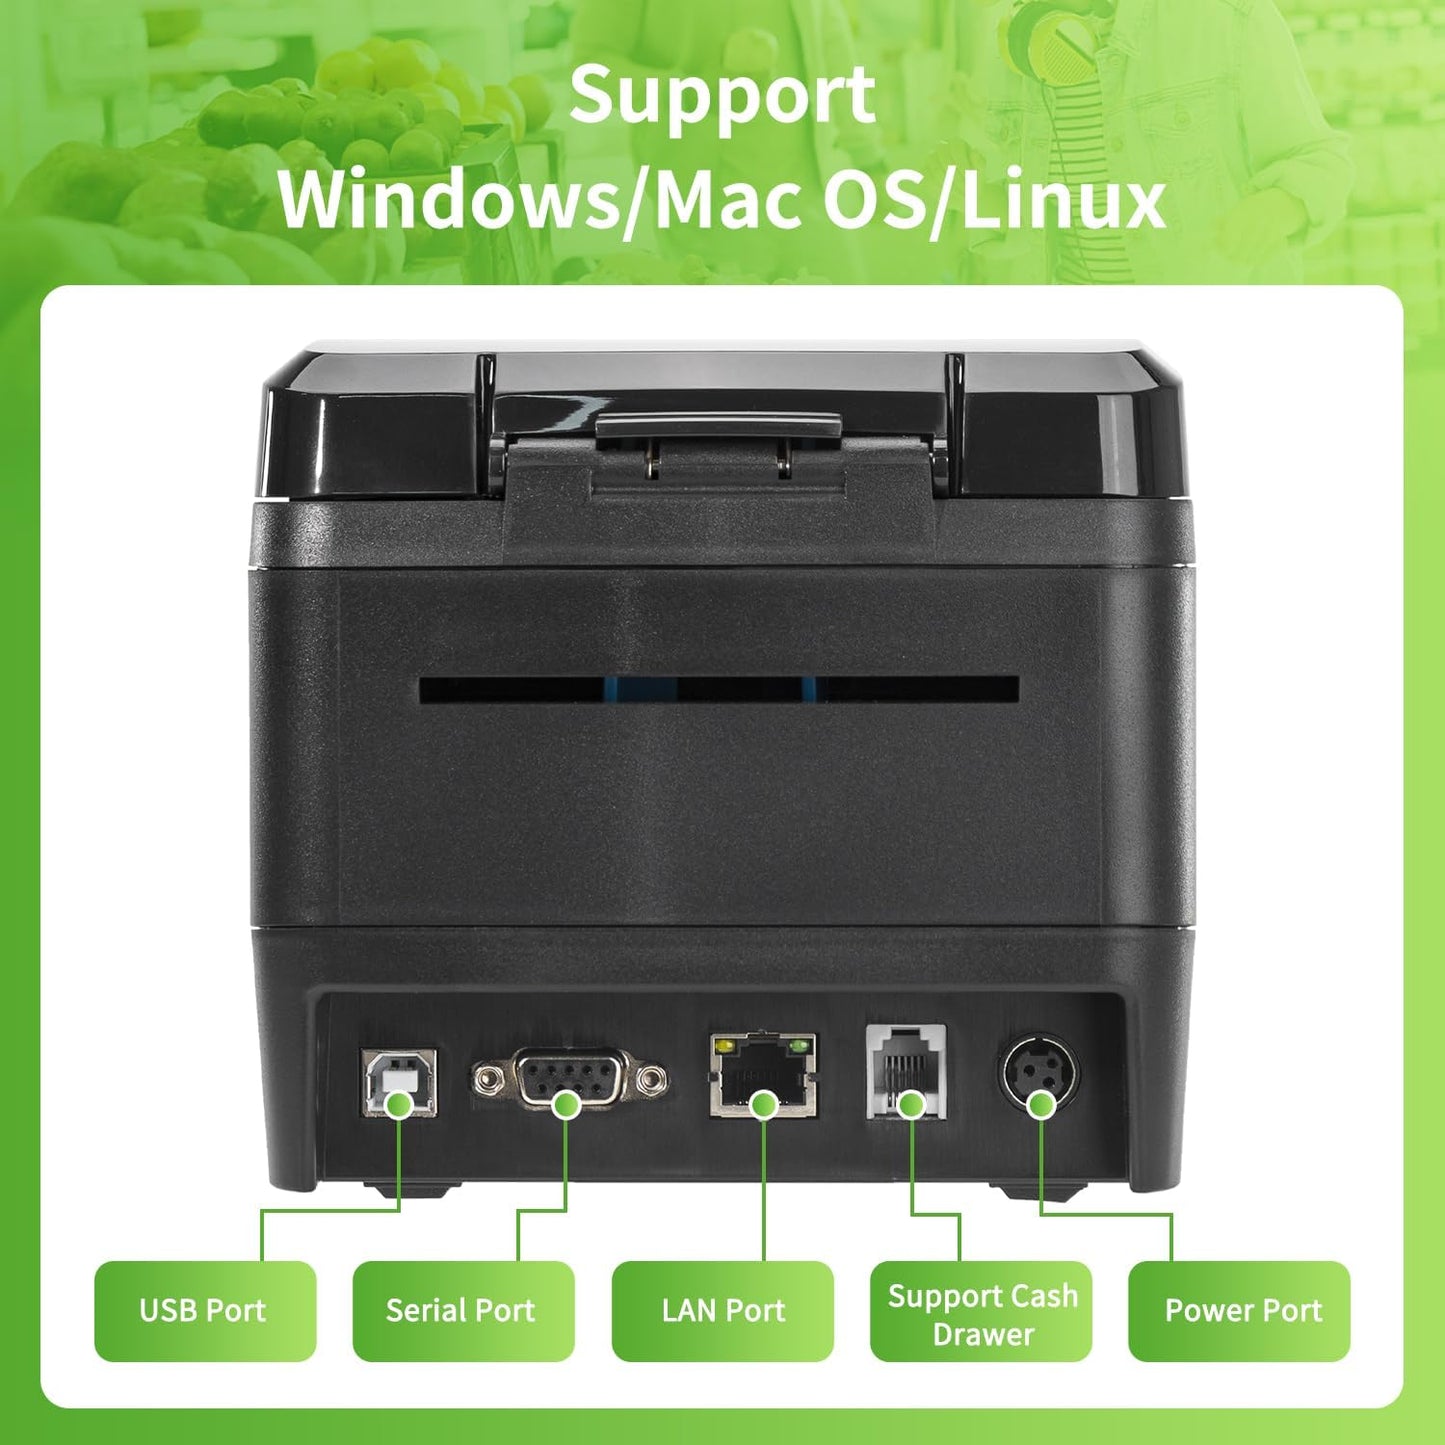 80mm Thermal Receipt Printer, USB POS Printer with Auto Cutter Cash Drawer, USB Serial Ethernet Interface Support Windows/Mac/Linux, Restaurant Kitchen Printer for ESC/POS